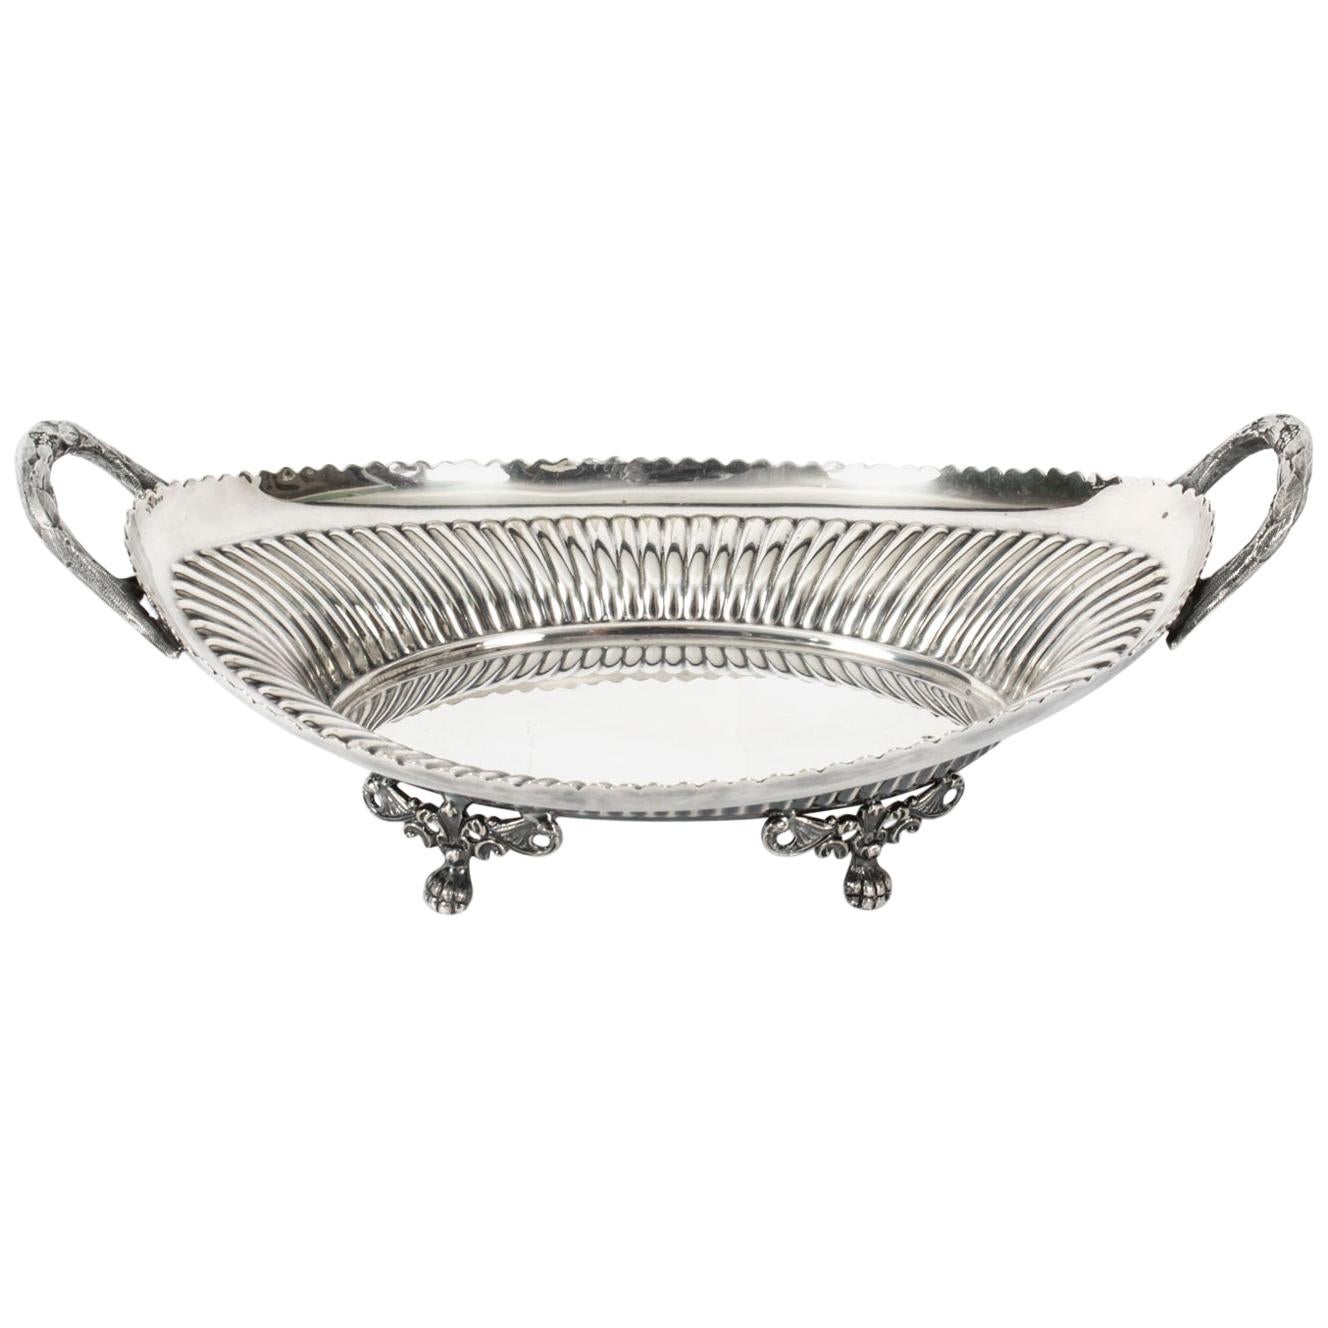 Antique Silver Plated Bread Basket by Walker & Hall, 19th Century